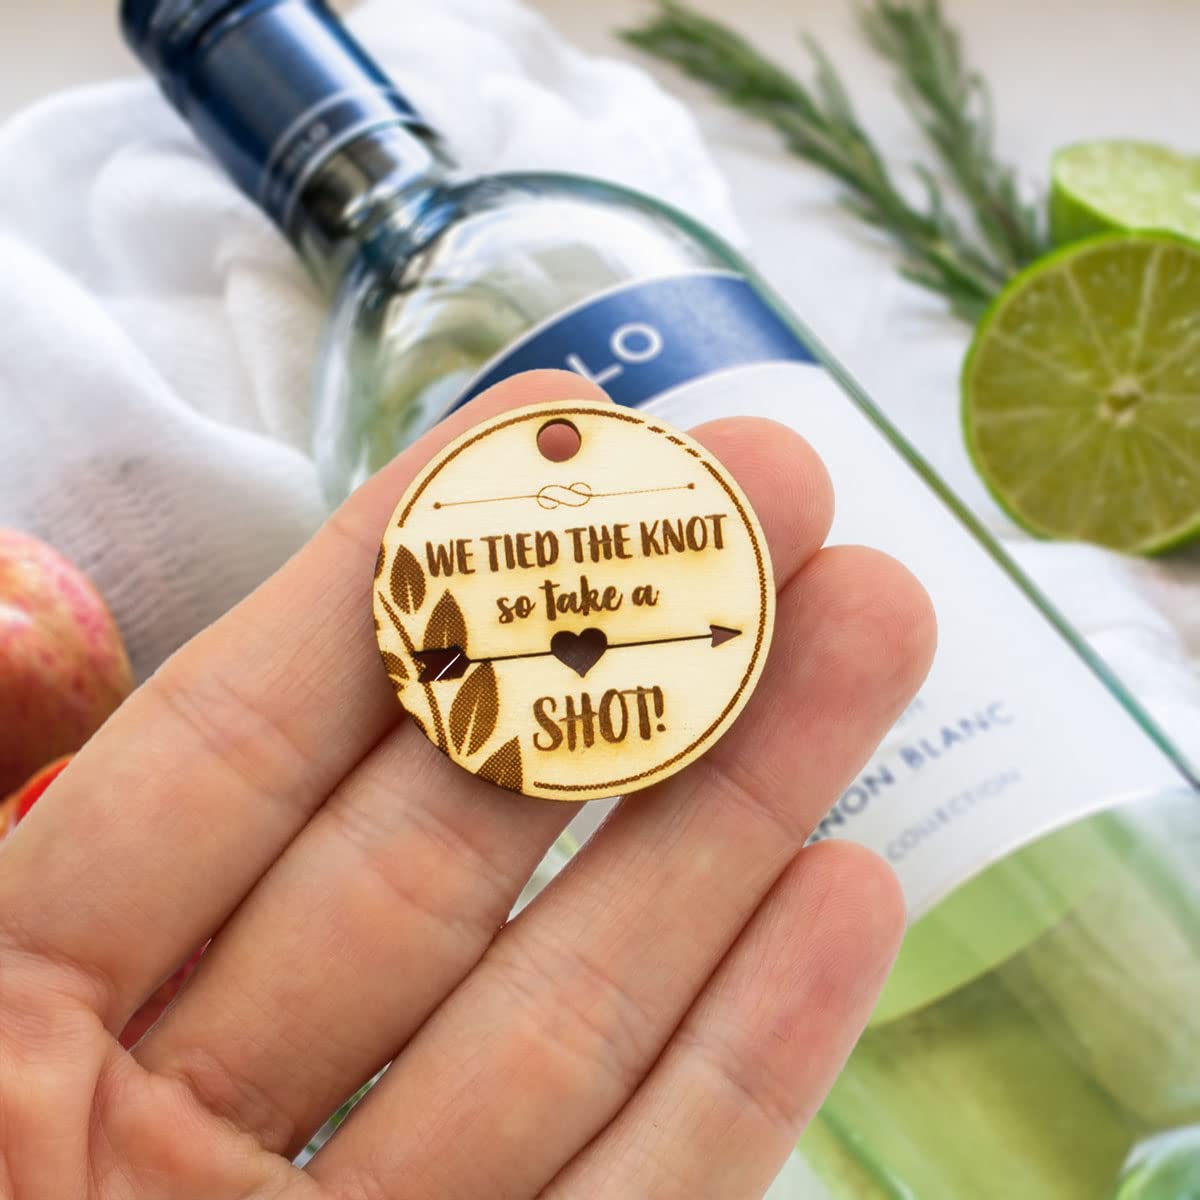 Summer-Ray 50 Laser Engraved We Tied The Knot so Take a Shot Mini Wooden Liquor Favor Tags (Design I, 30mm)